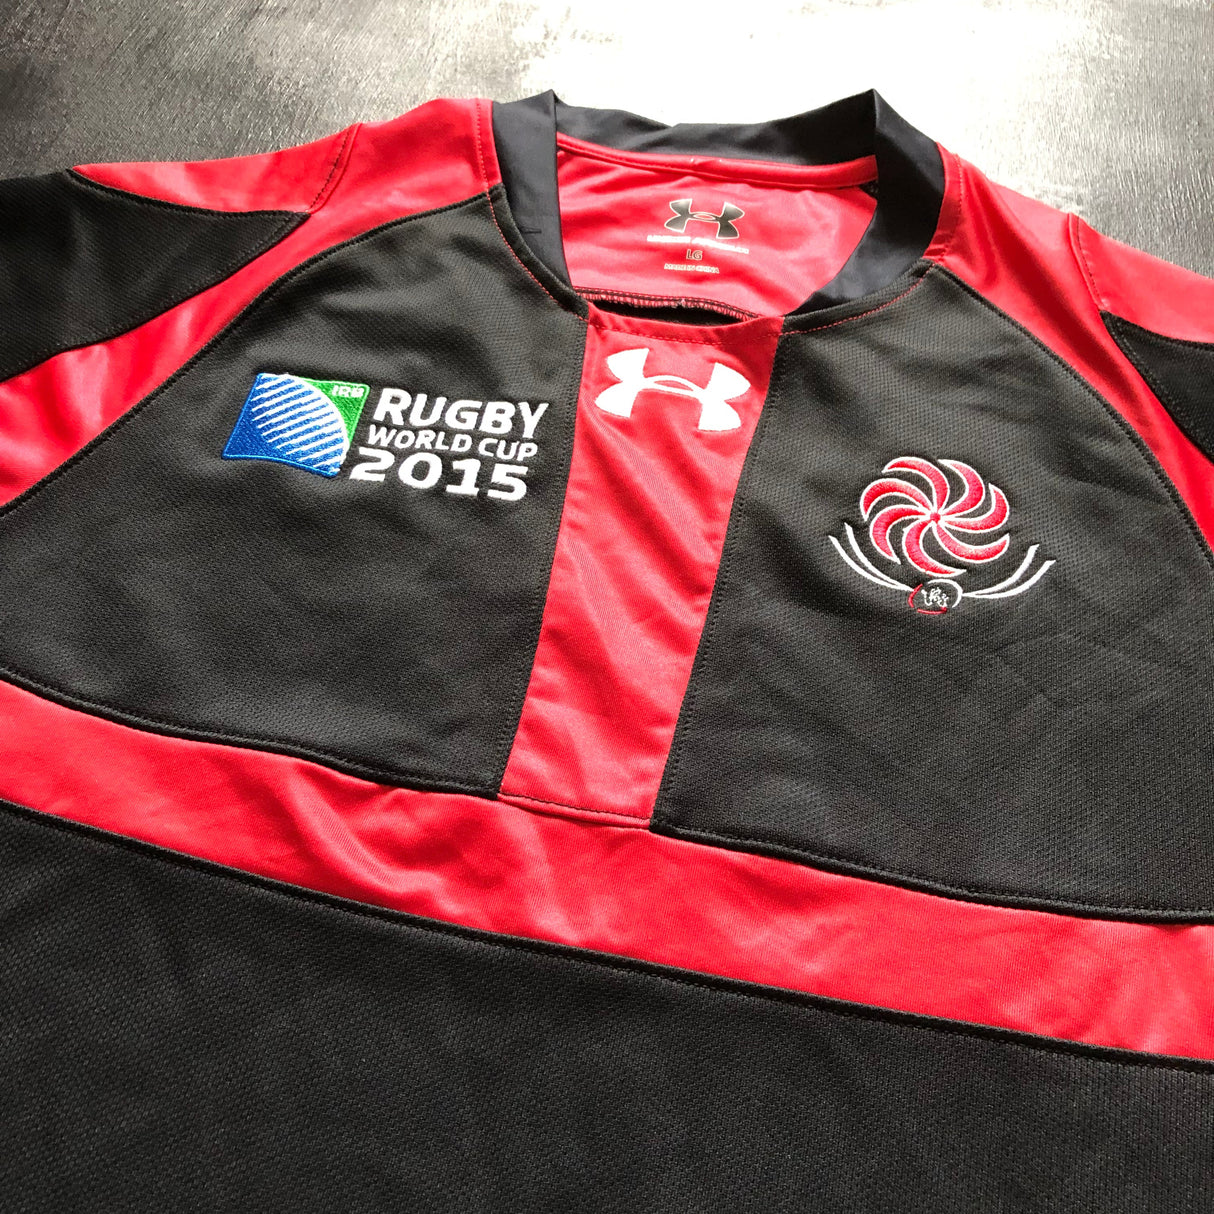 Georgia National Rugby Team Jersey 2015 Rugby World Cup Away Large Underdog Rugby - The Tier 2 Rugby Shop 